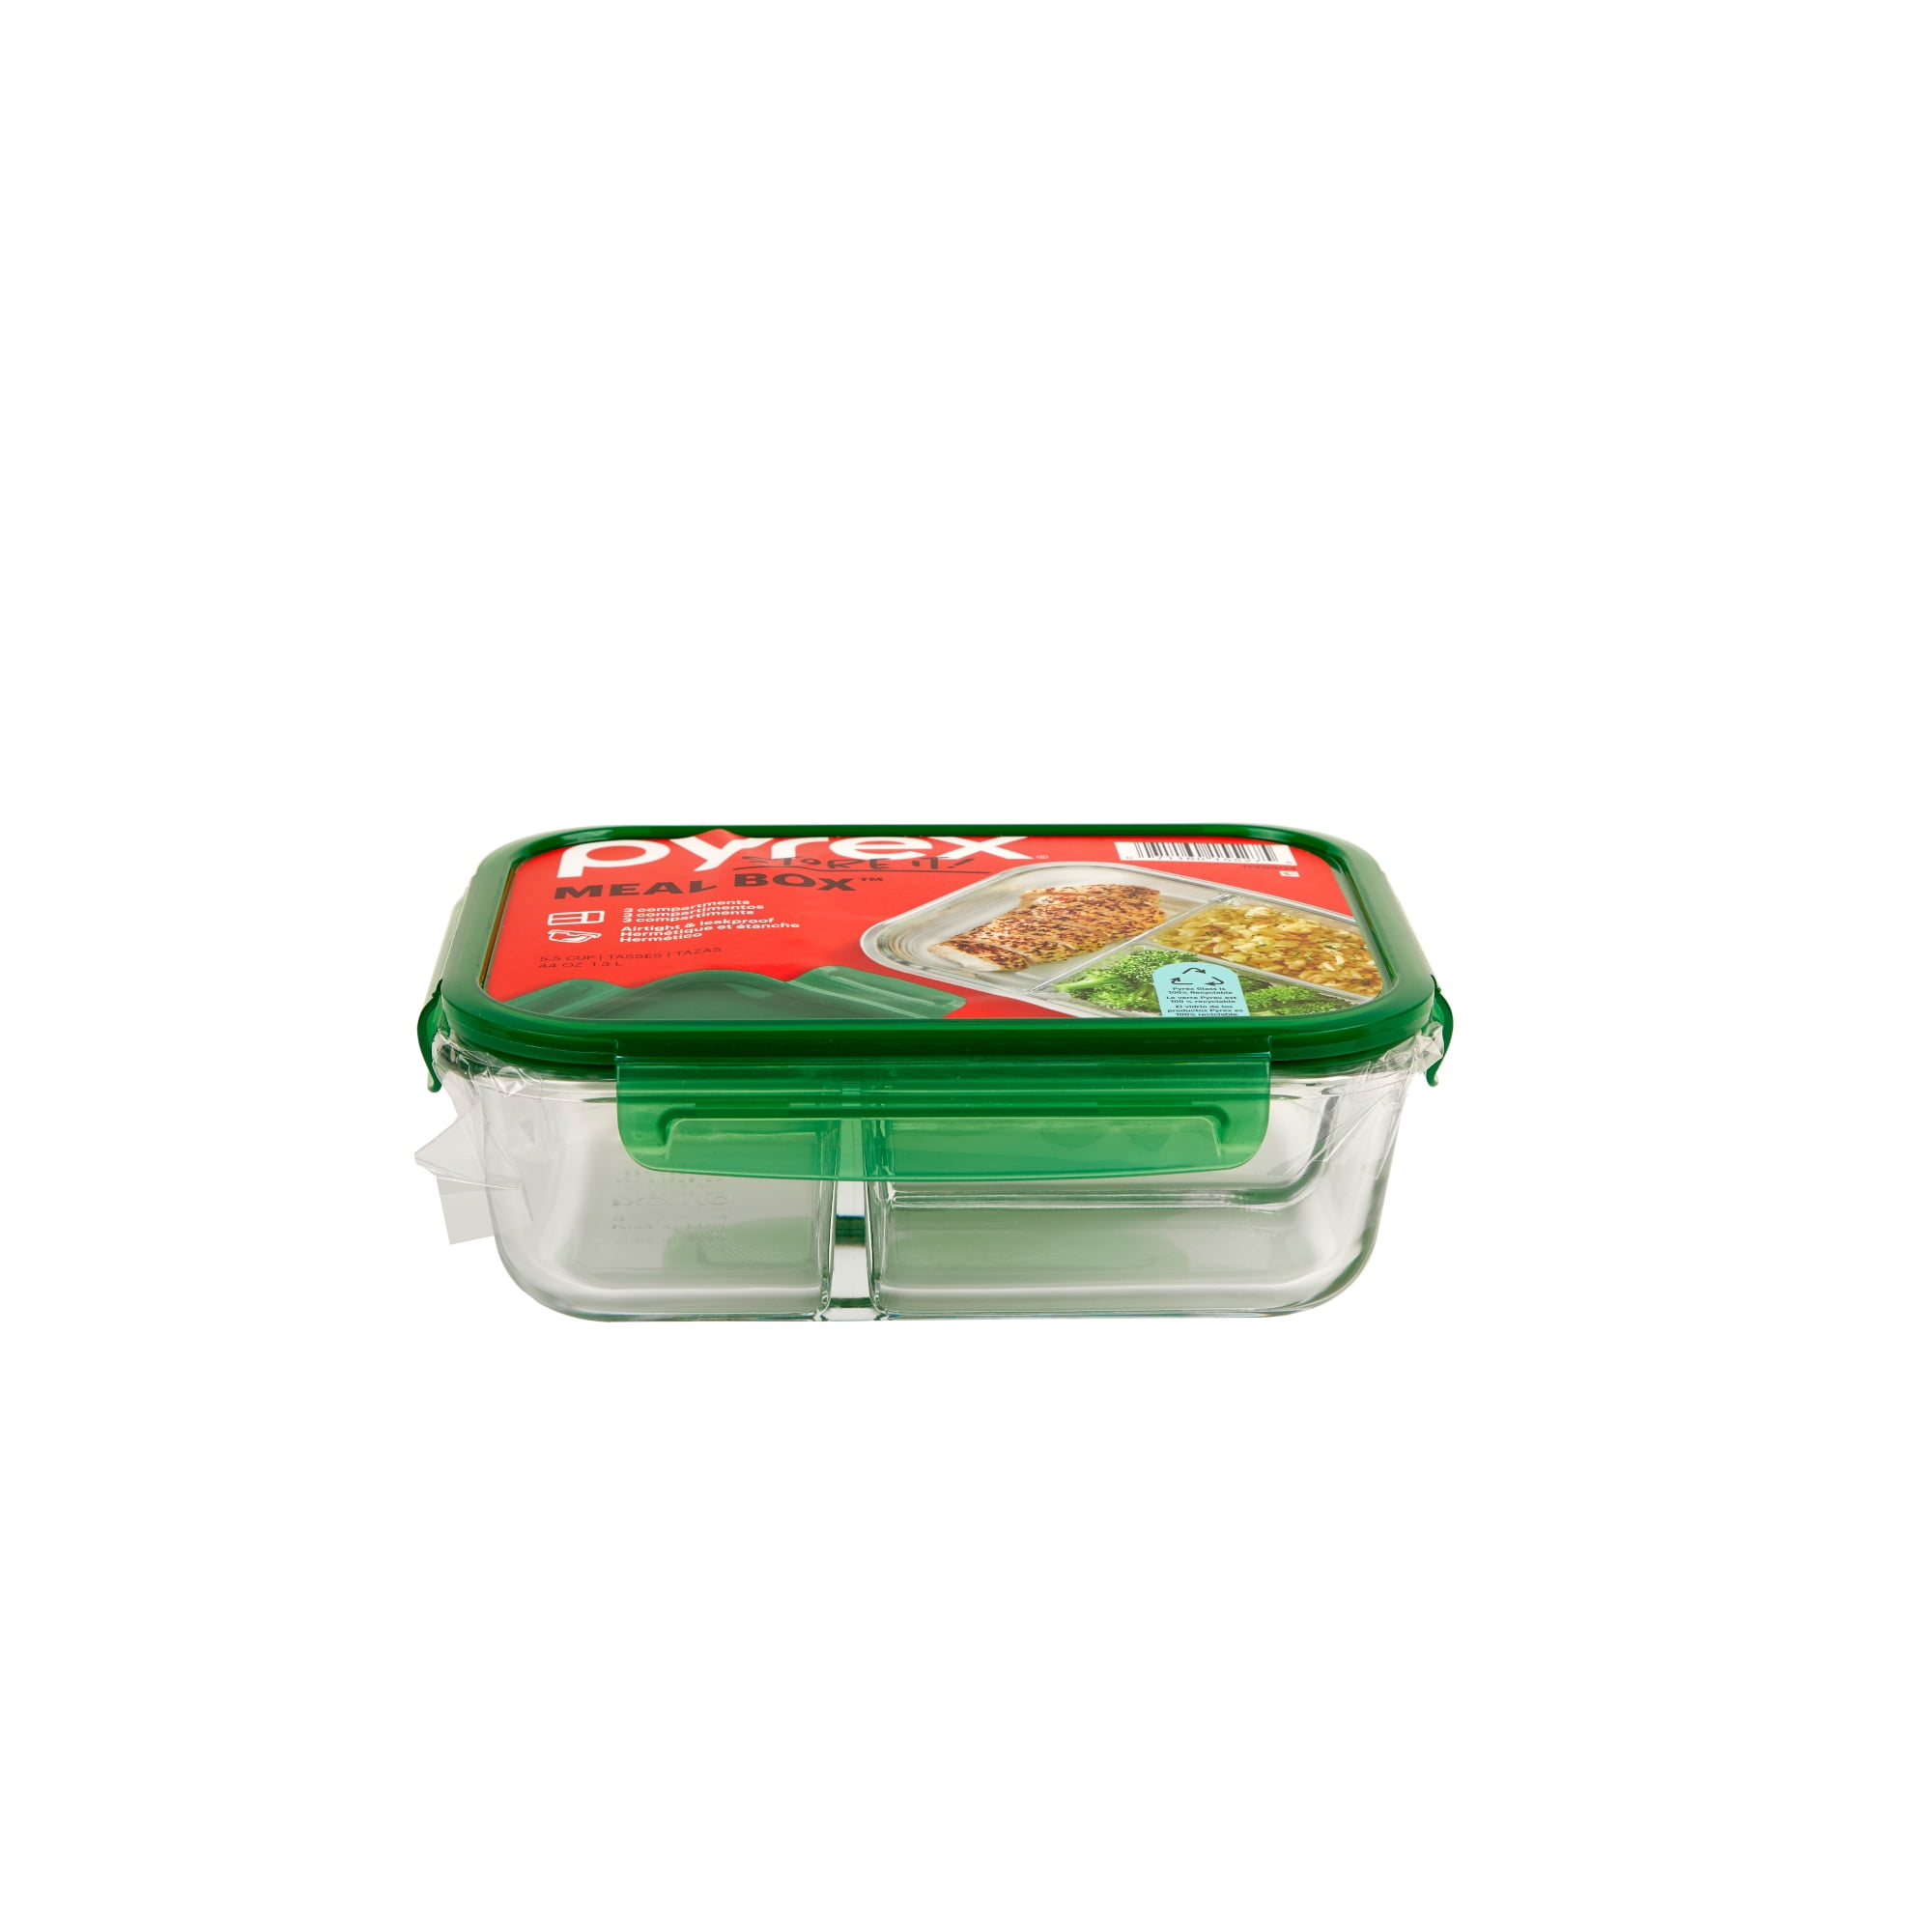 Pyrex 5.5-Cup Meal Box Storage Rectangle with Plastic Cover